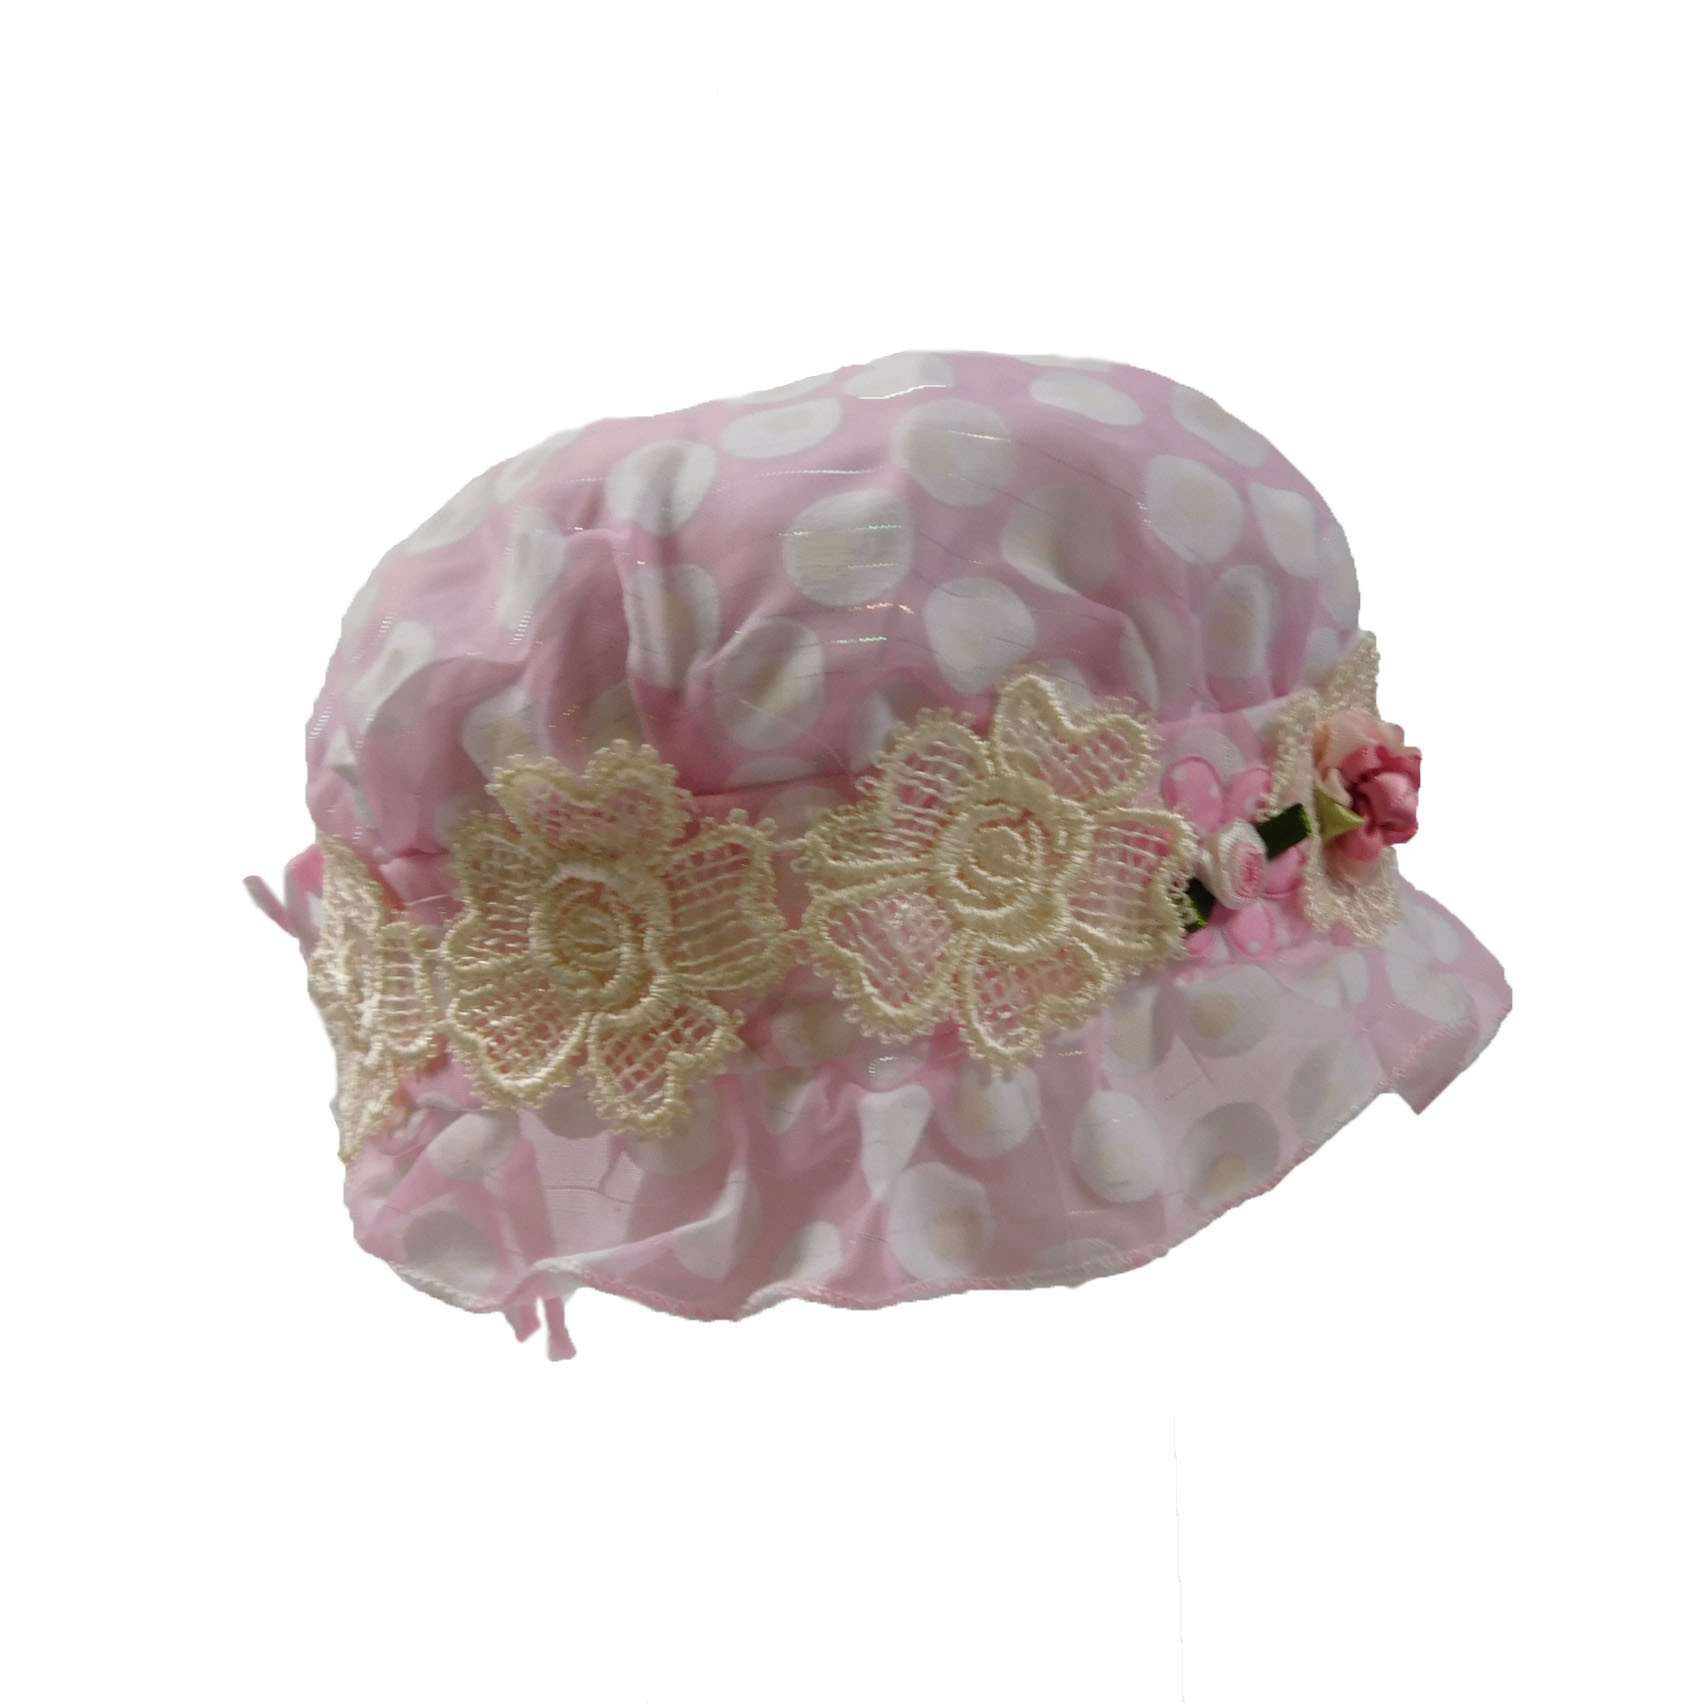 Polka Dot Bonnet with Lace and Silk Decoration Bucket Hat HHkids    